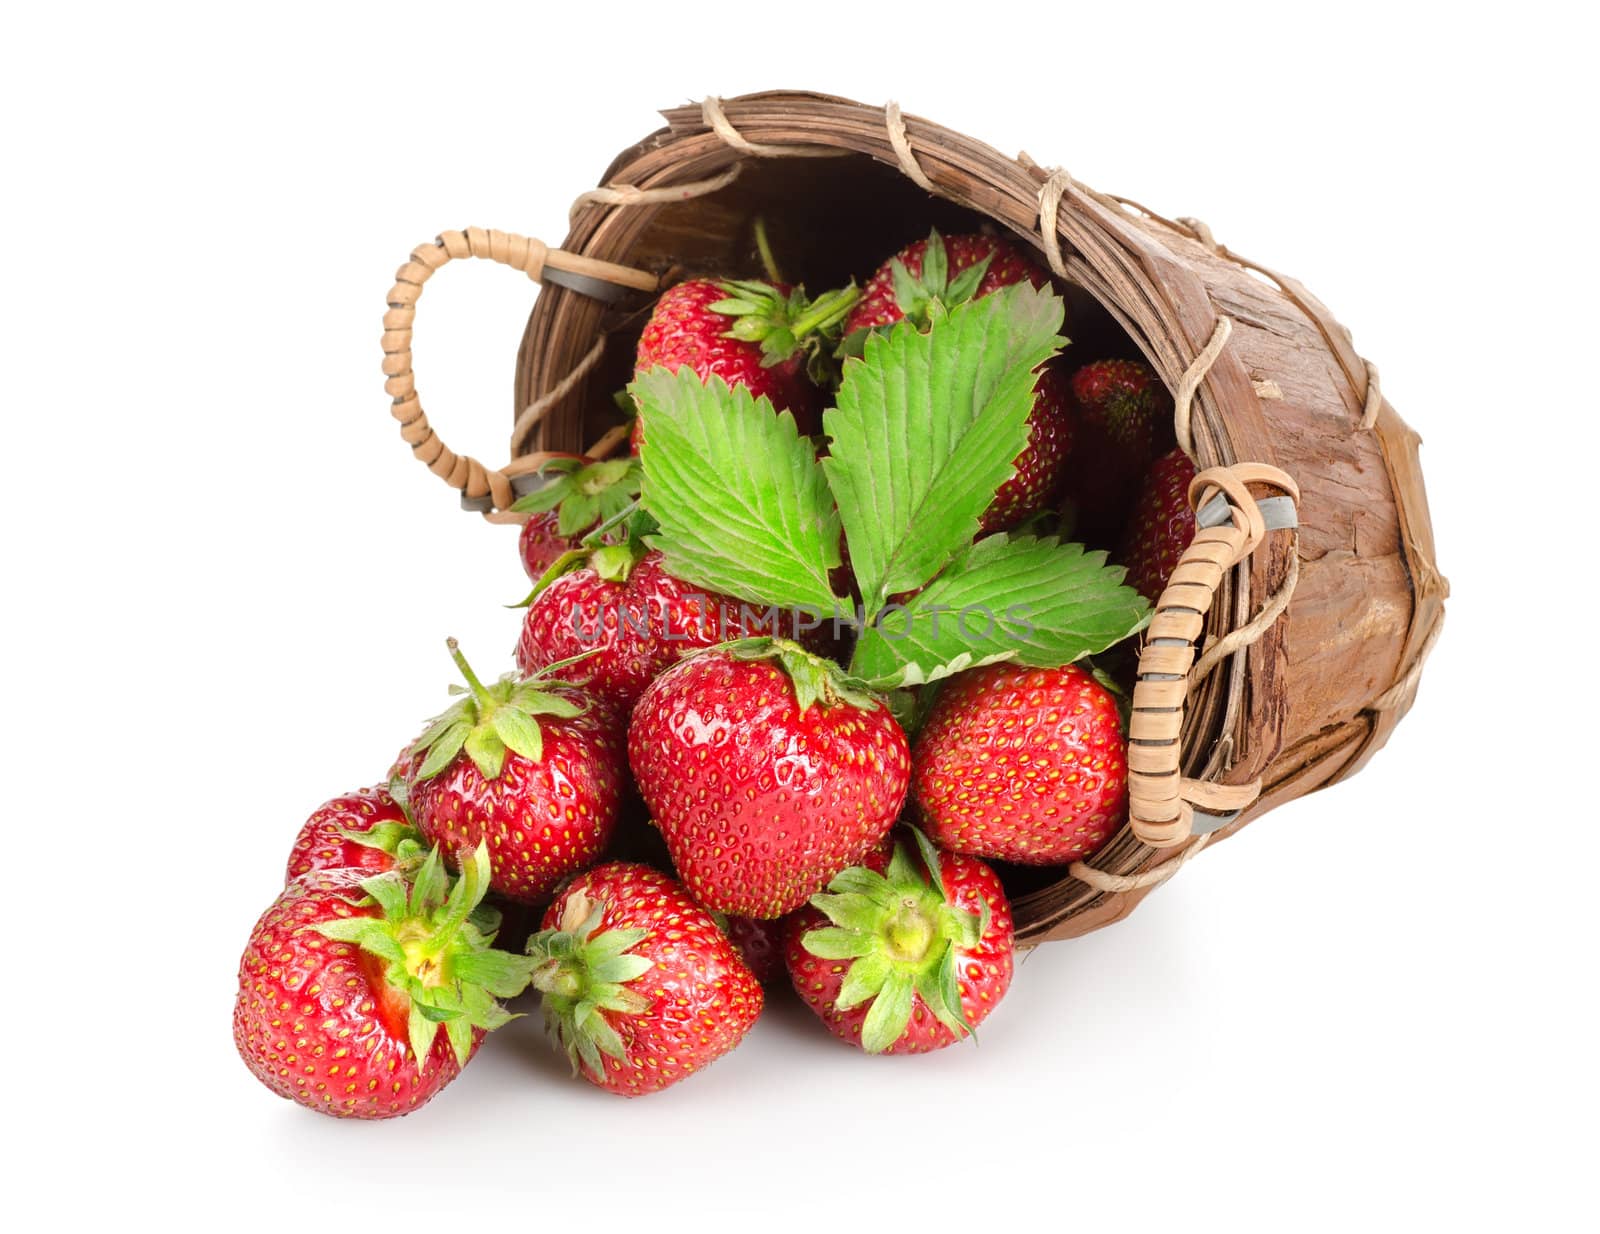 Strawberries in a wooden basket by Givaga